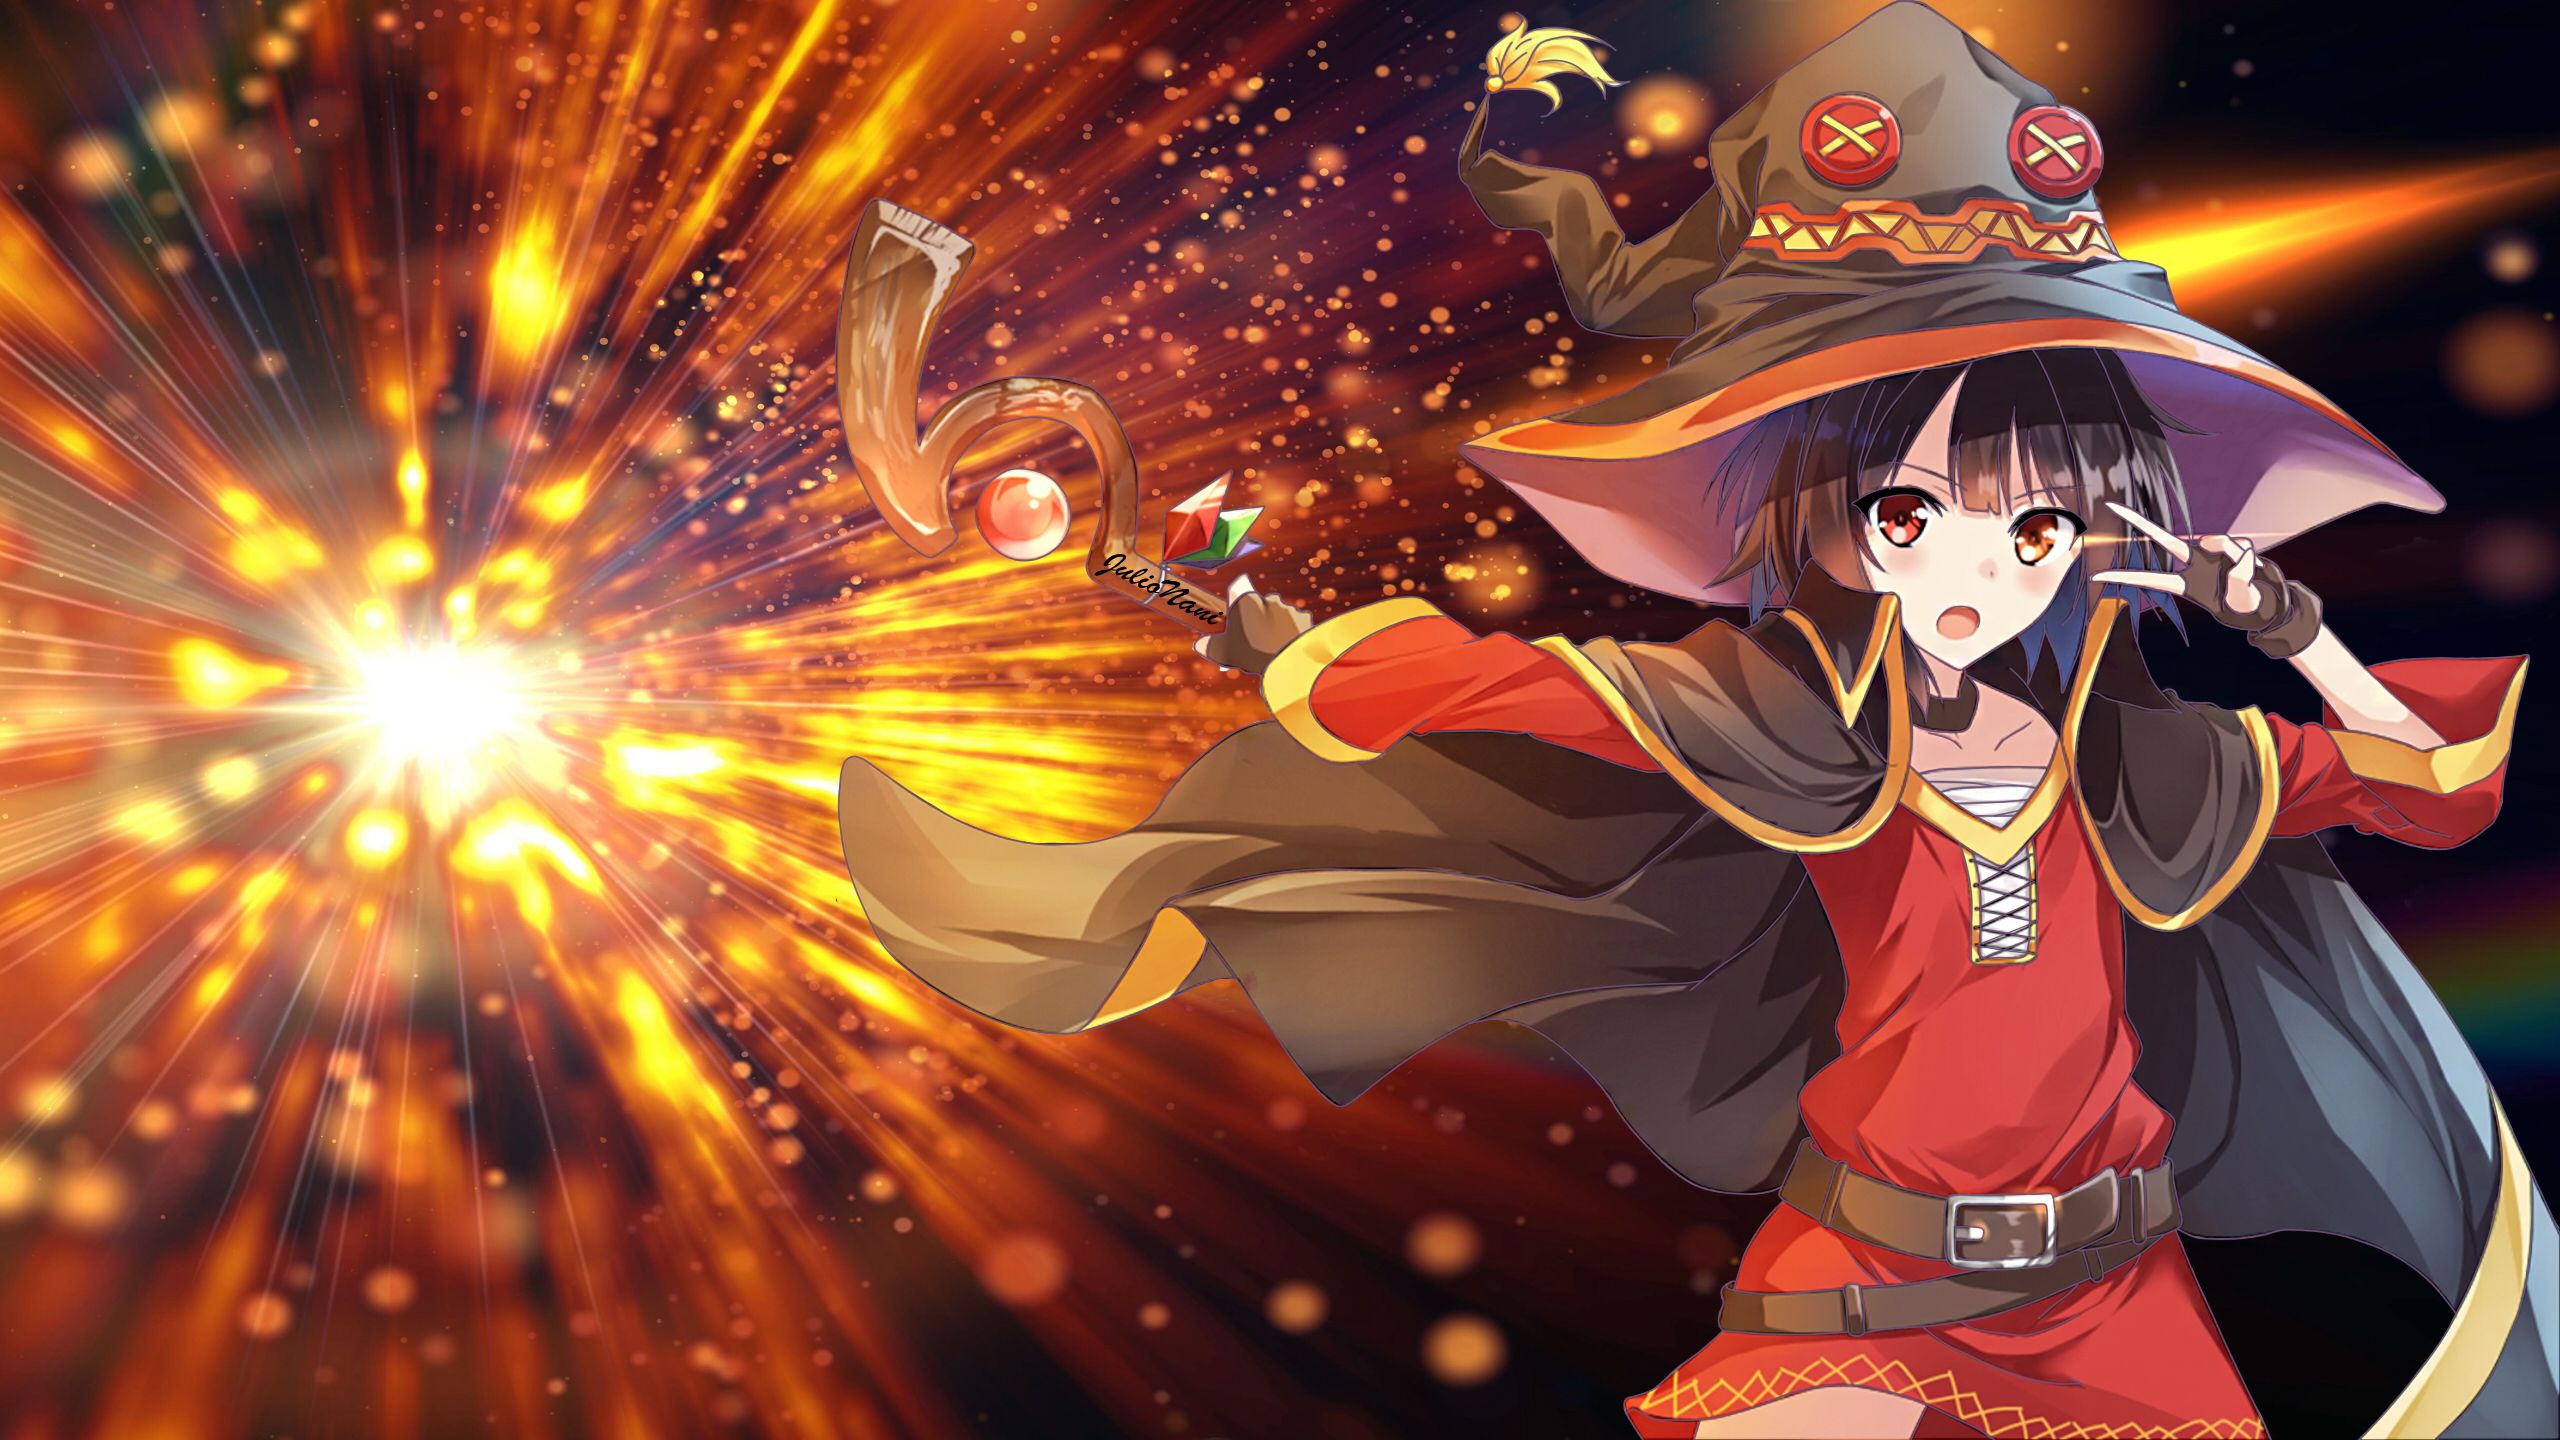 Megumin Konosuba Wallpapers posted by Zoey Tremblay